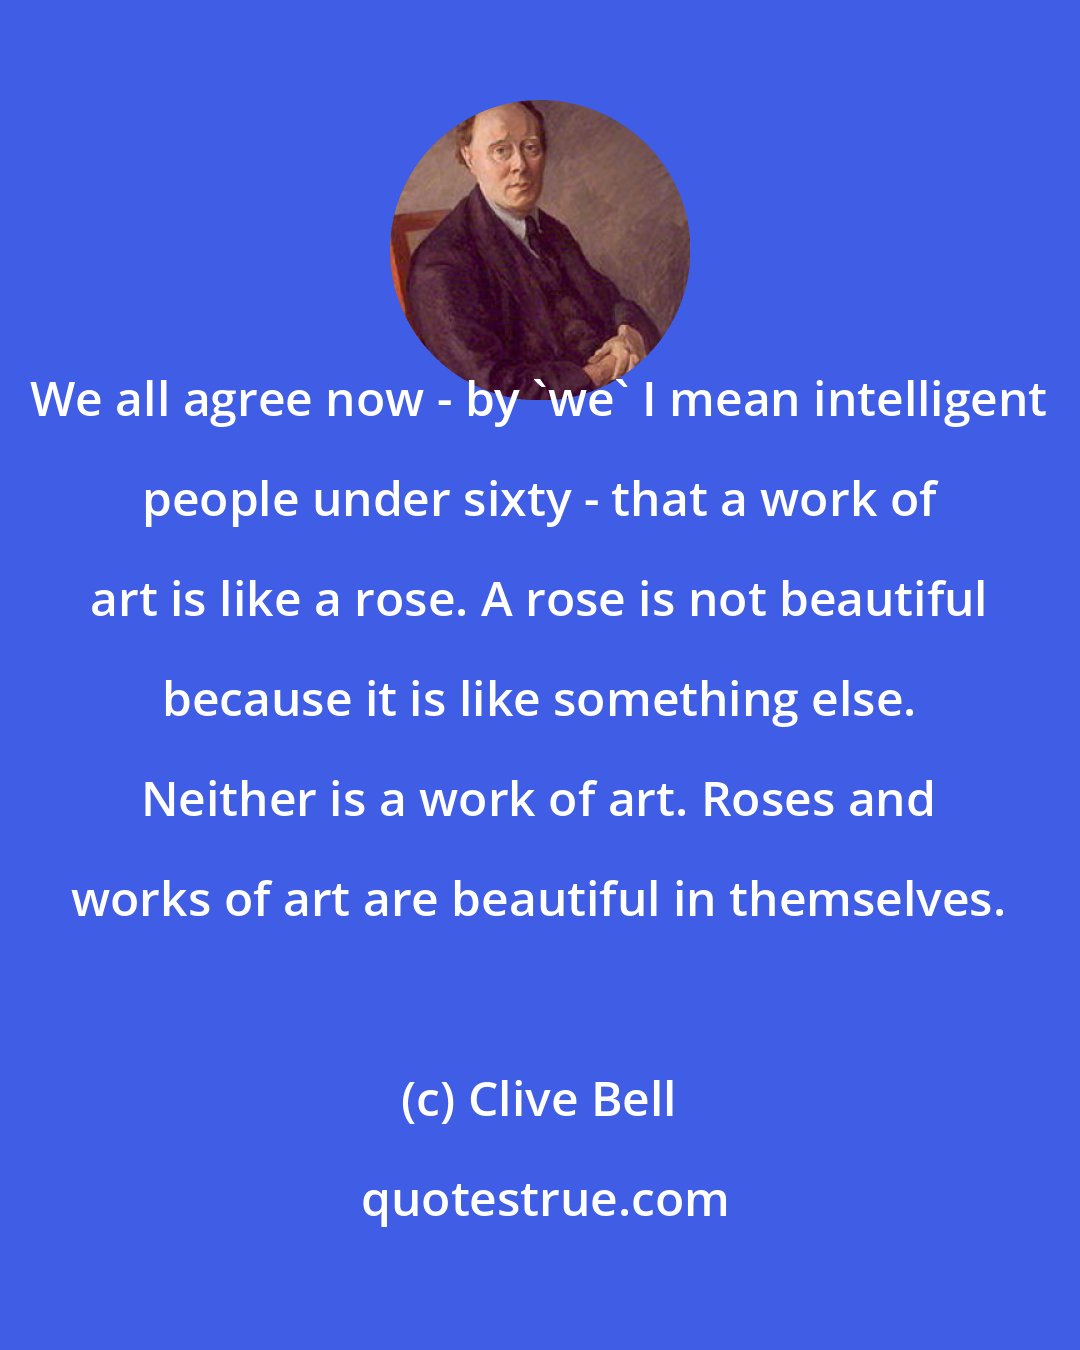 Clive Bell: We all agree now - by 'we' I mean intelligent people under sixty - that a work of art is like a rose. A rose is not beautiful because it is like something else. Neither is a work of art. Roses and works of art are beautiful in themselves.